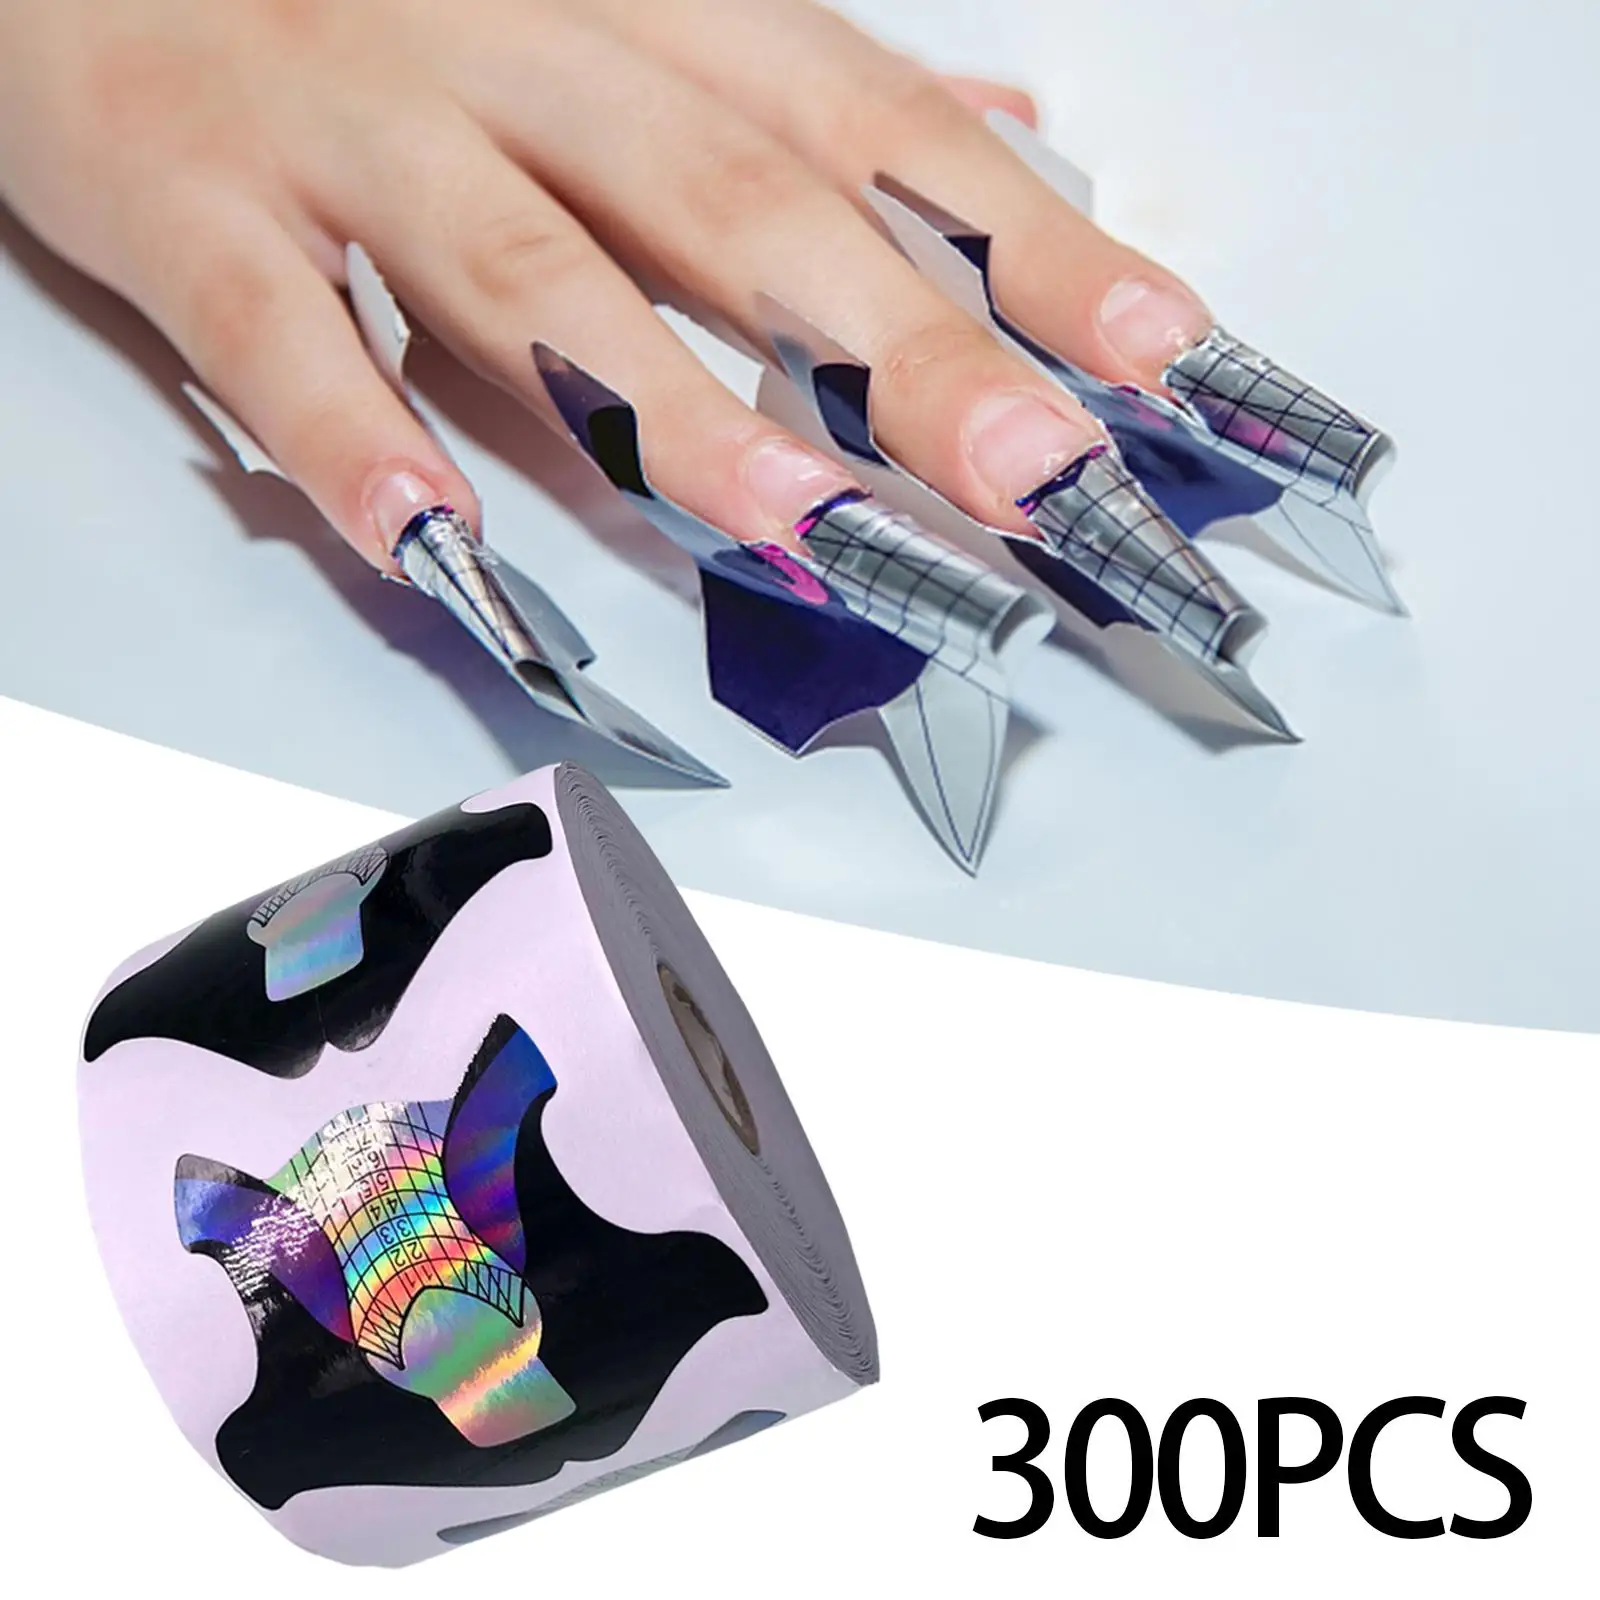 300Pcs Long Nail Forms for Acrylic Nails Nail Extension Forms Guide Stickers